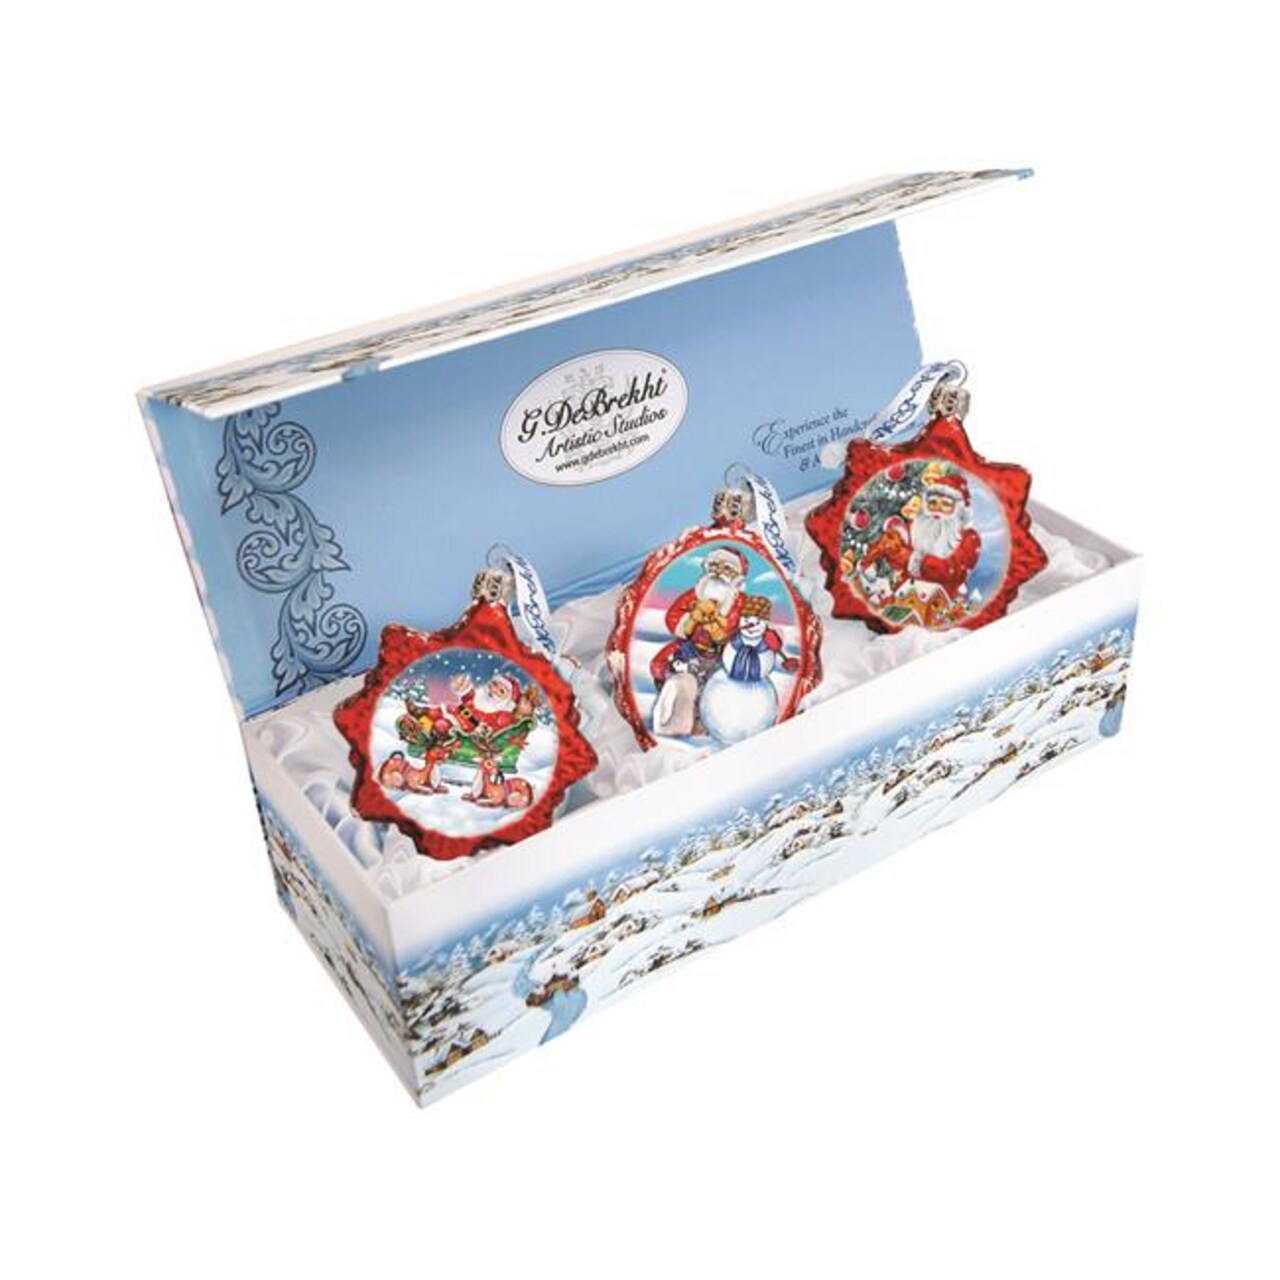 G.DeBrekht 770126S3 Christmas Gifts Glass Ornaments - Set of 3